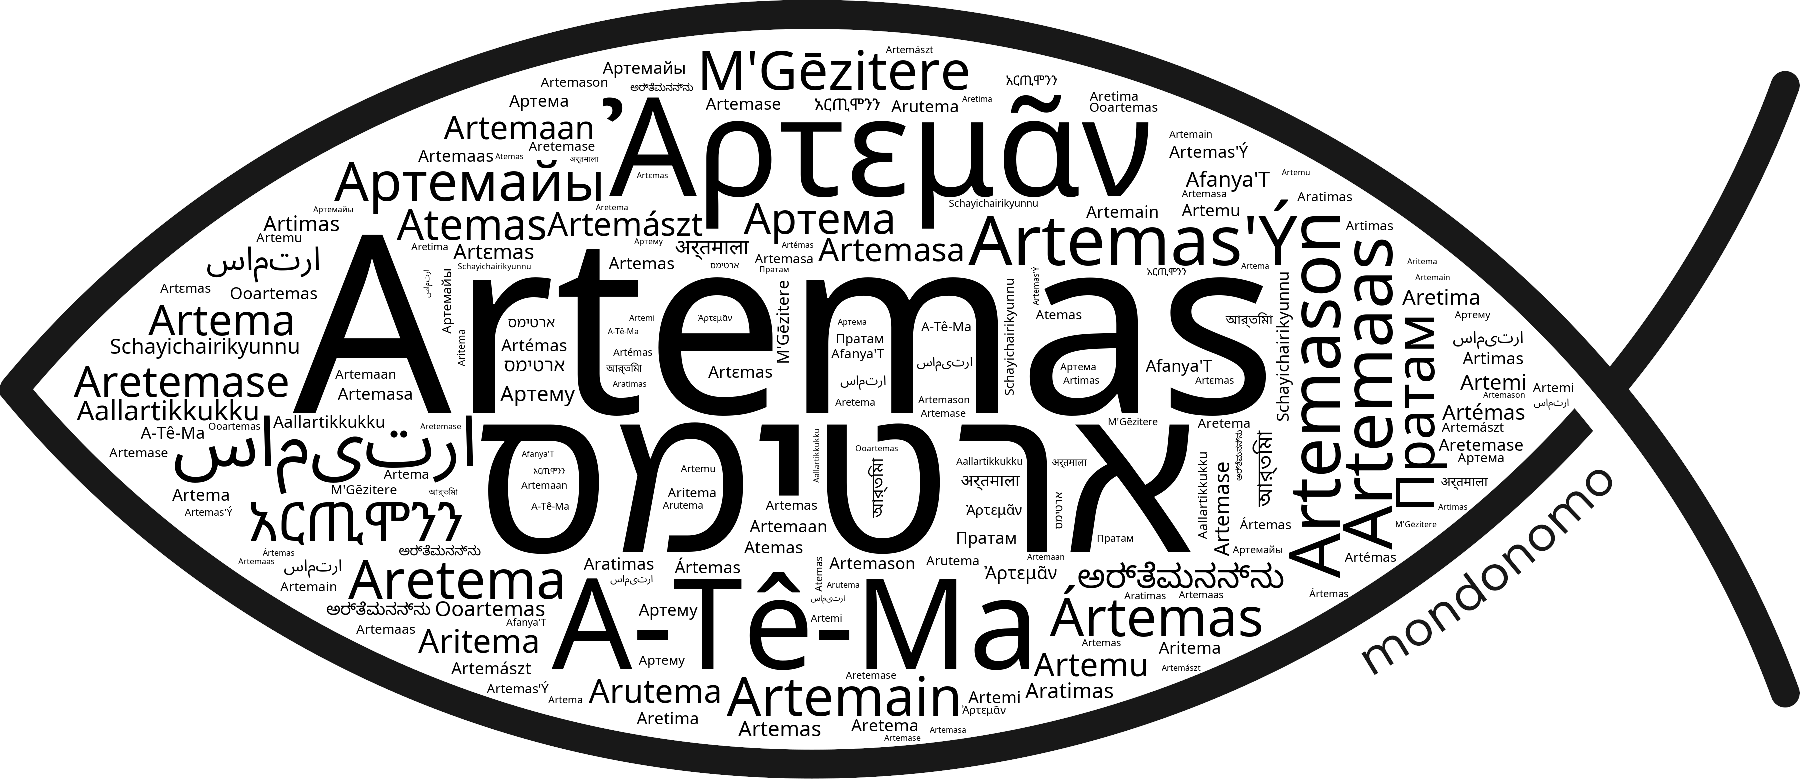 Name Artemas in the world's Bibles